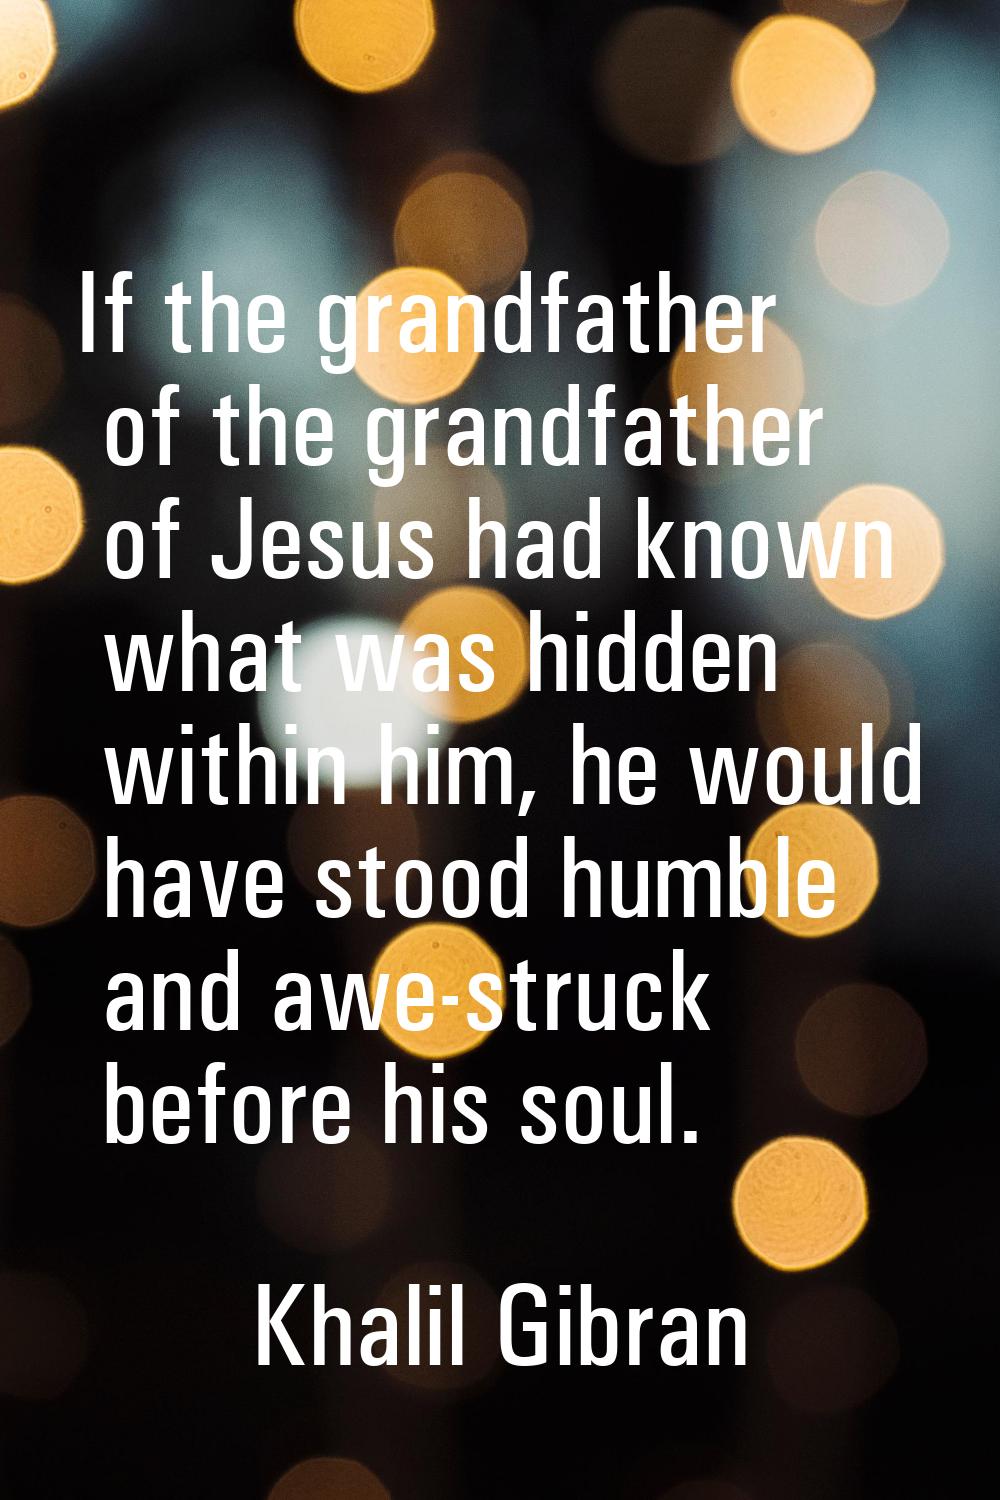 If the grandfather of the grandfather of Jesus had known what was hidden within him, he would have 